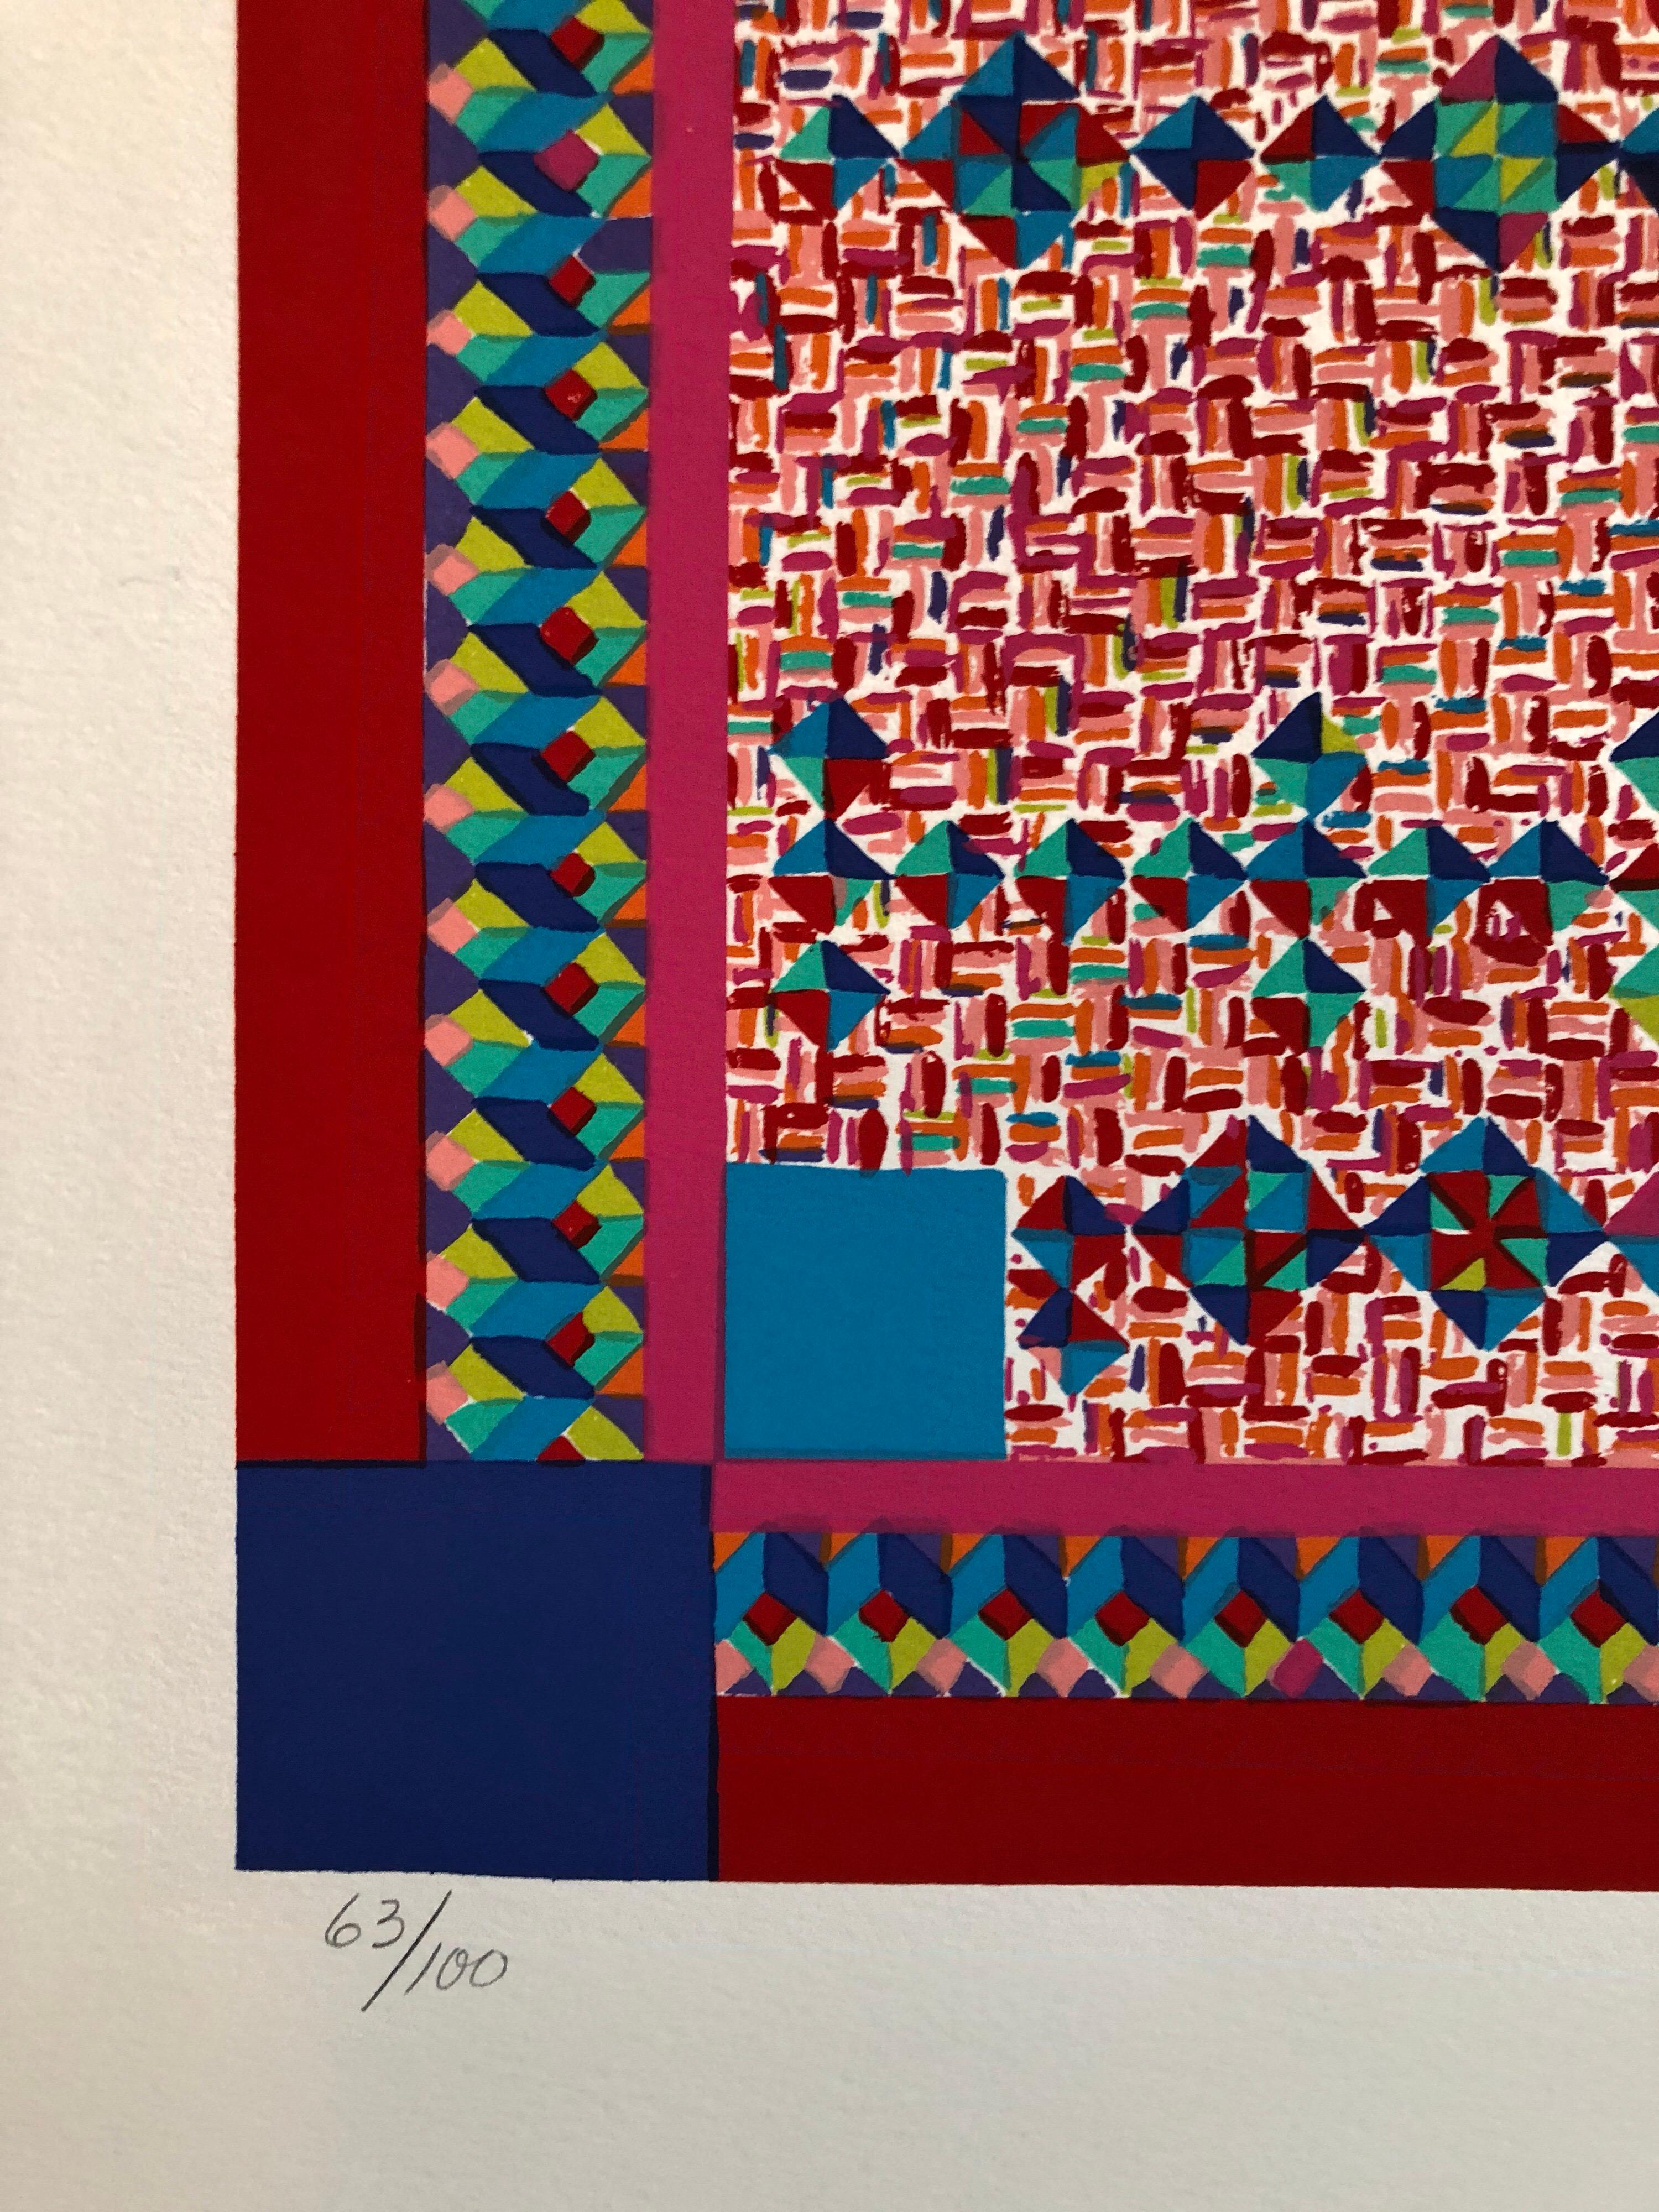 Dee Shapiro is a Contemporary American artist and writer associated with the Pattern and Decoration movement. I have seen this referred to as Hejaz.
Dee Shapiro was inspired to be an Artist in her early years of education. Dee's career started in